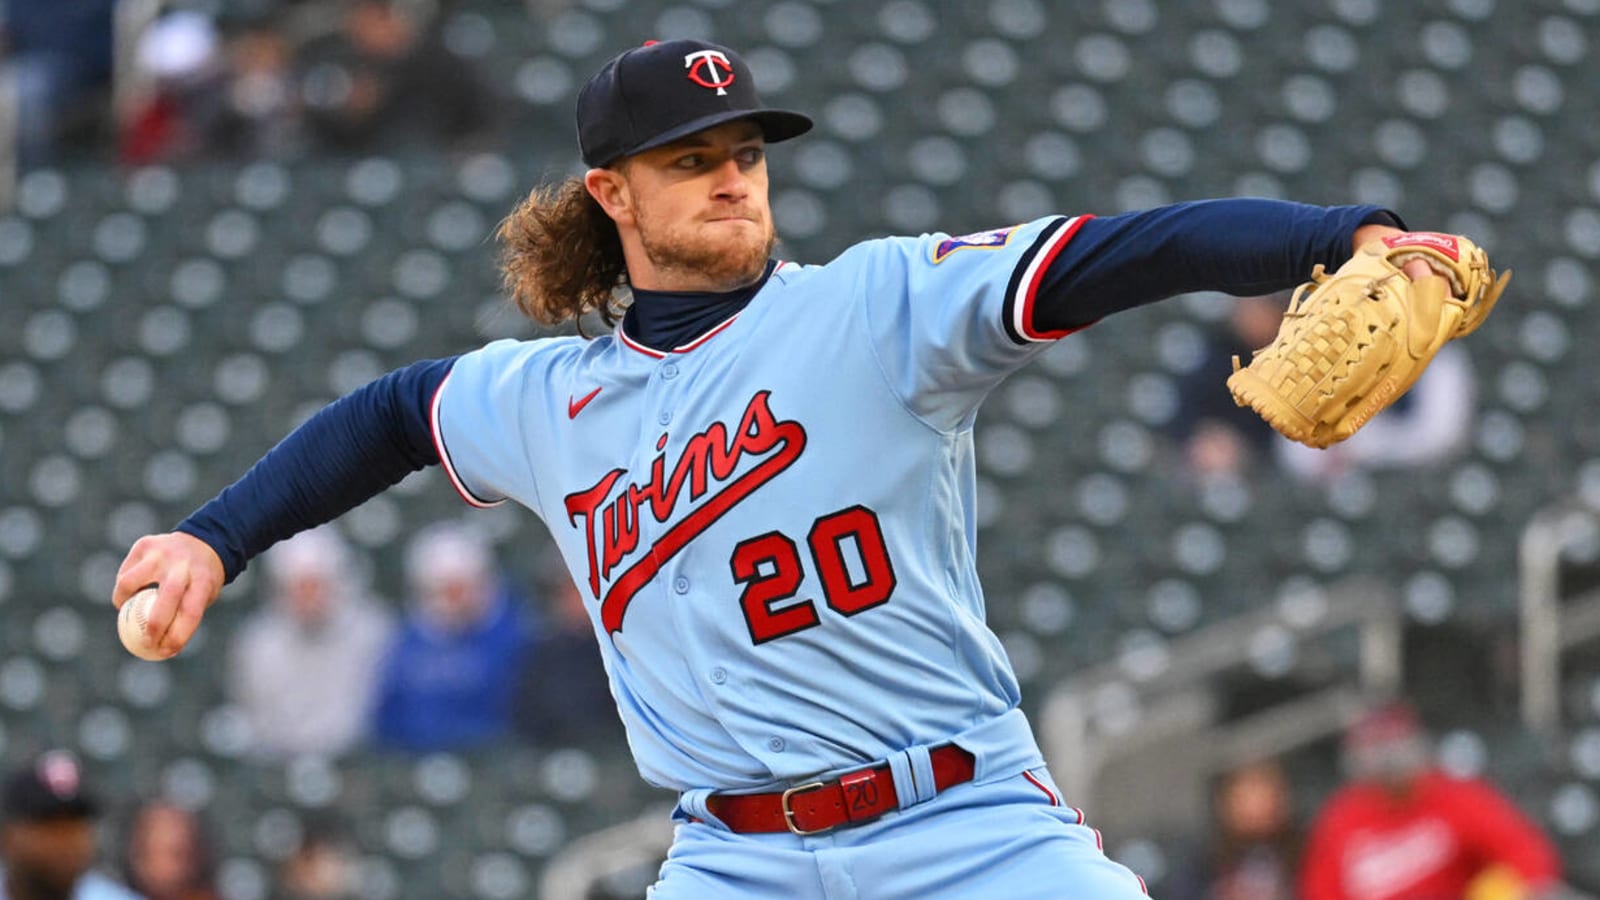 Twins could get righty pitcher back just in time for postseason